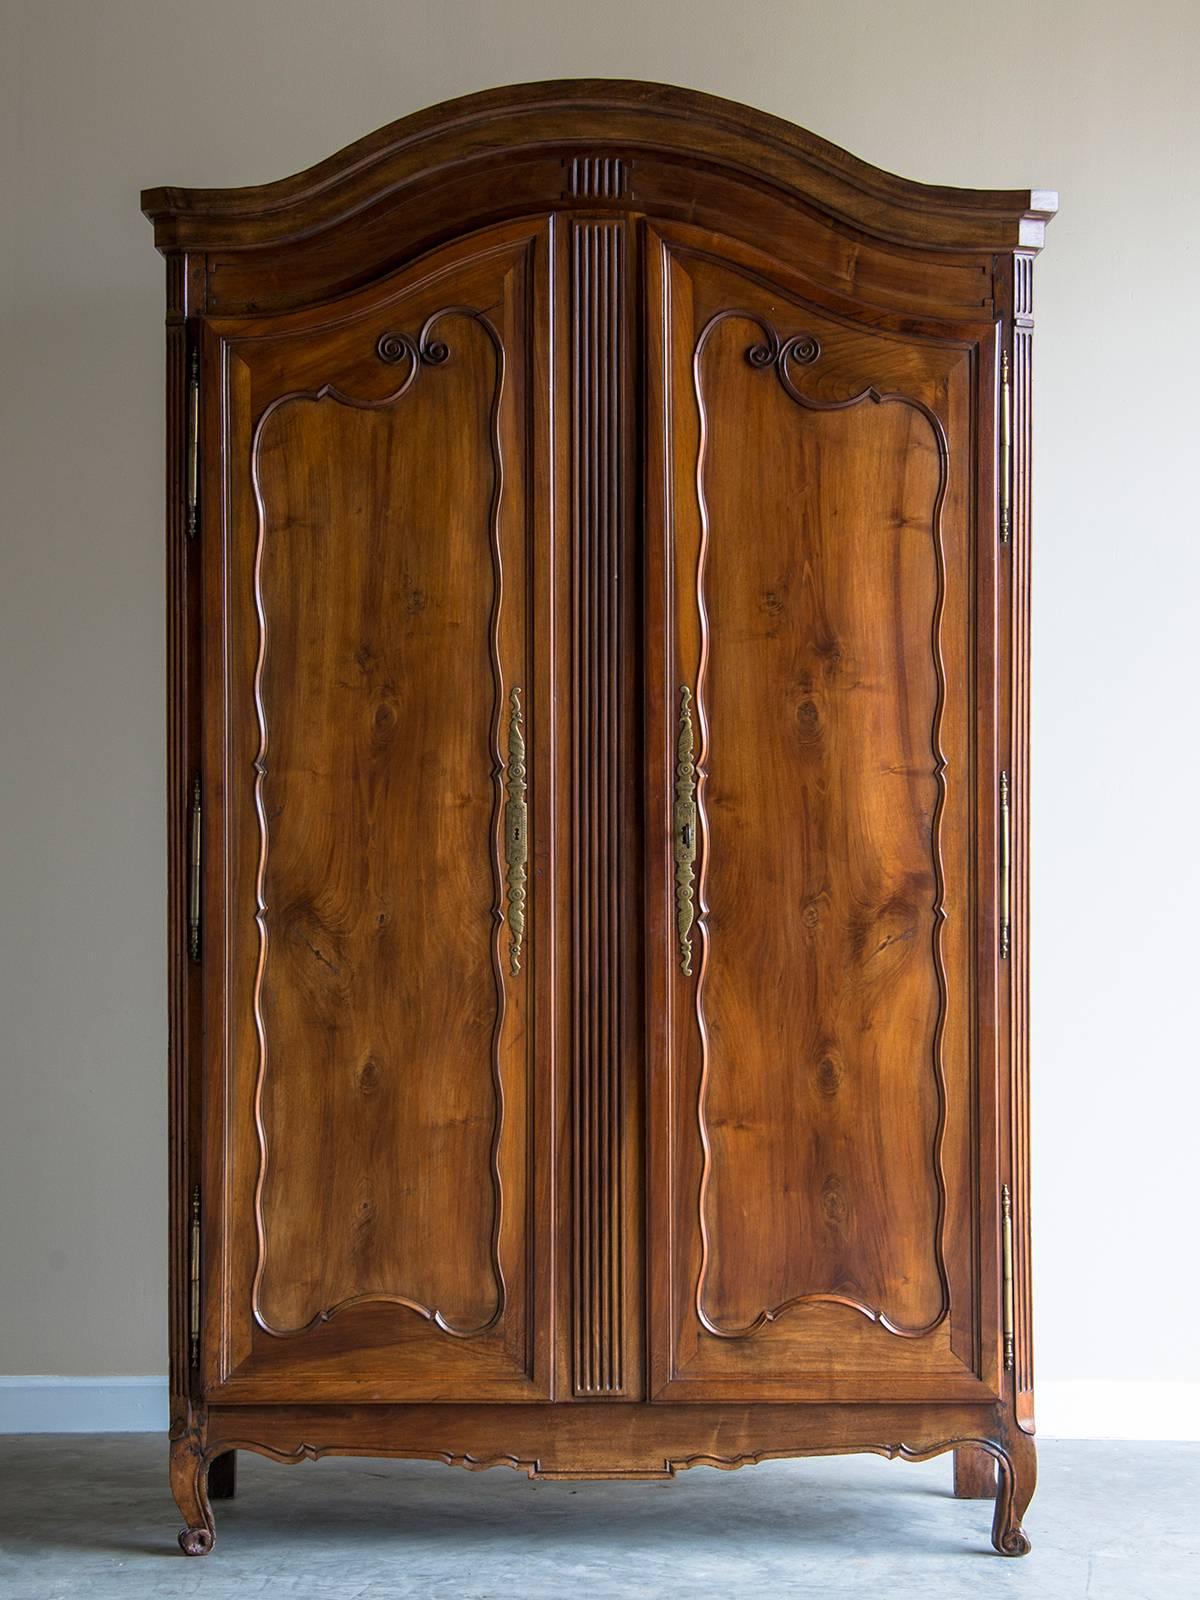 Receive our new selections direct from 1stdibs by email each week. Please click Follow Dealer below and see them first!

Louis XV style antique French cherrywood armoire from Normandy, France circa 1785.